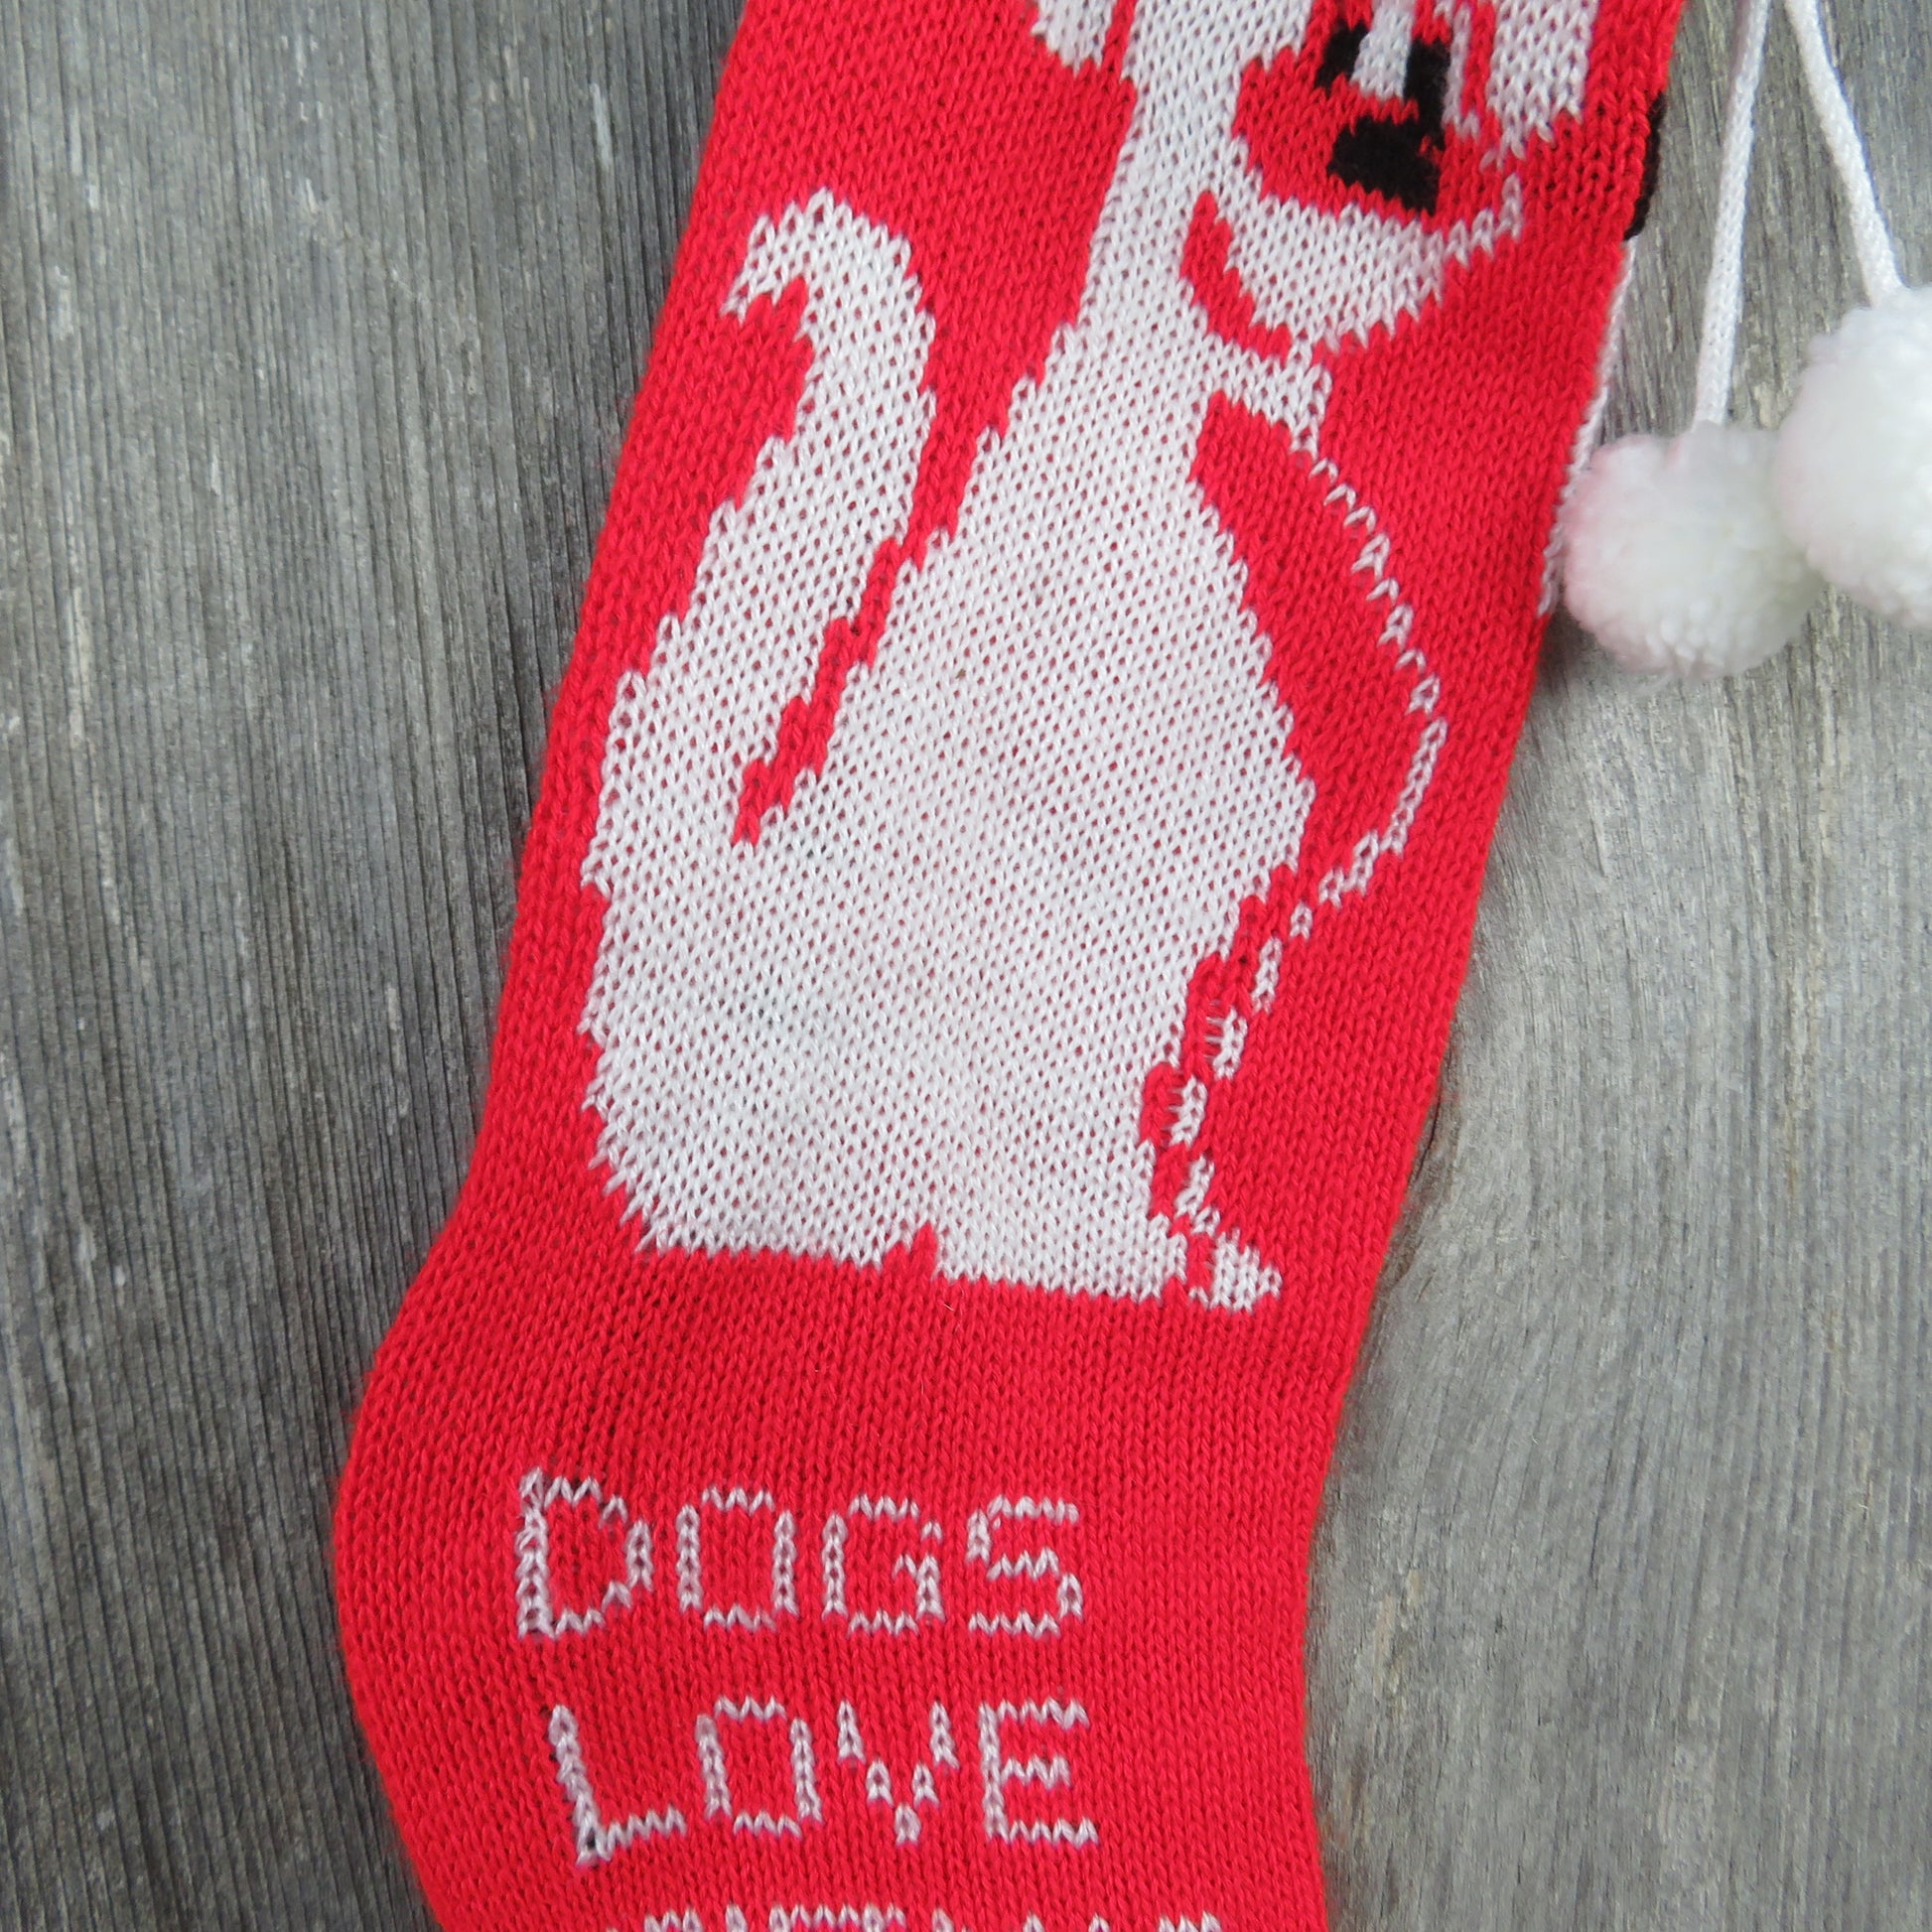 Vintage Dog Pet Knit Stocking Dogs Love Christmas Too Knitted Knit Puppy 1980s Red White Green - At Grandma's Table